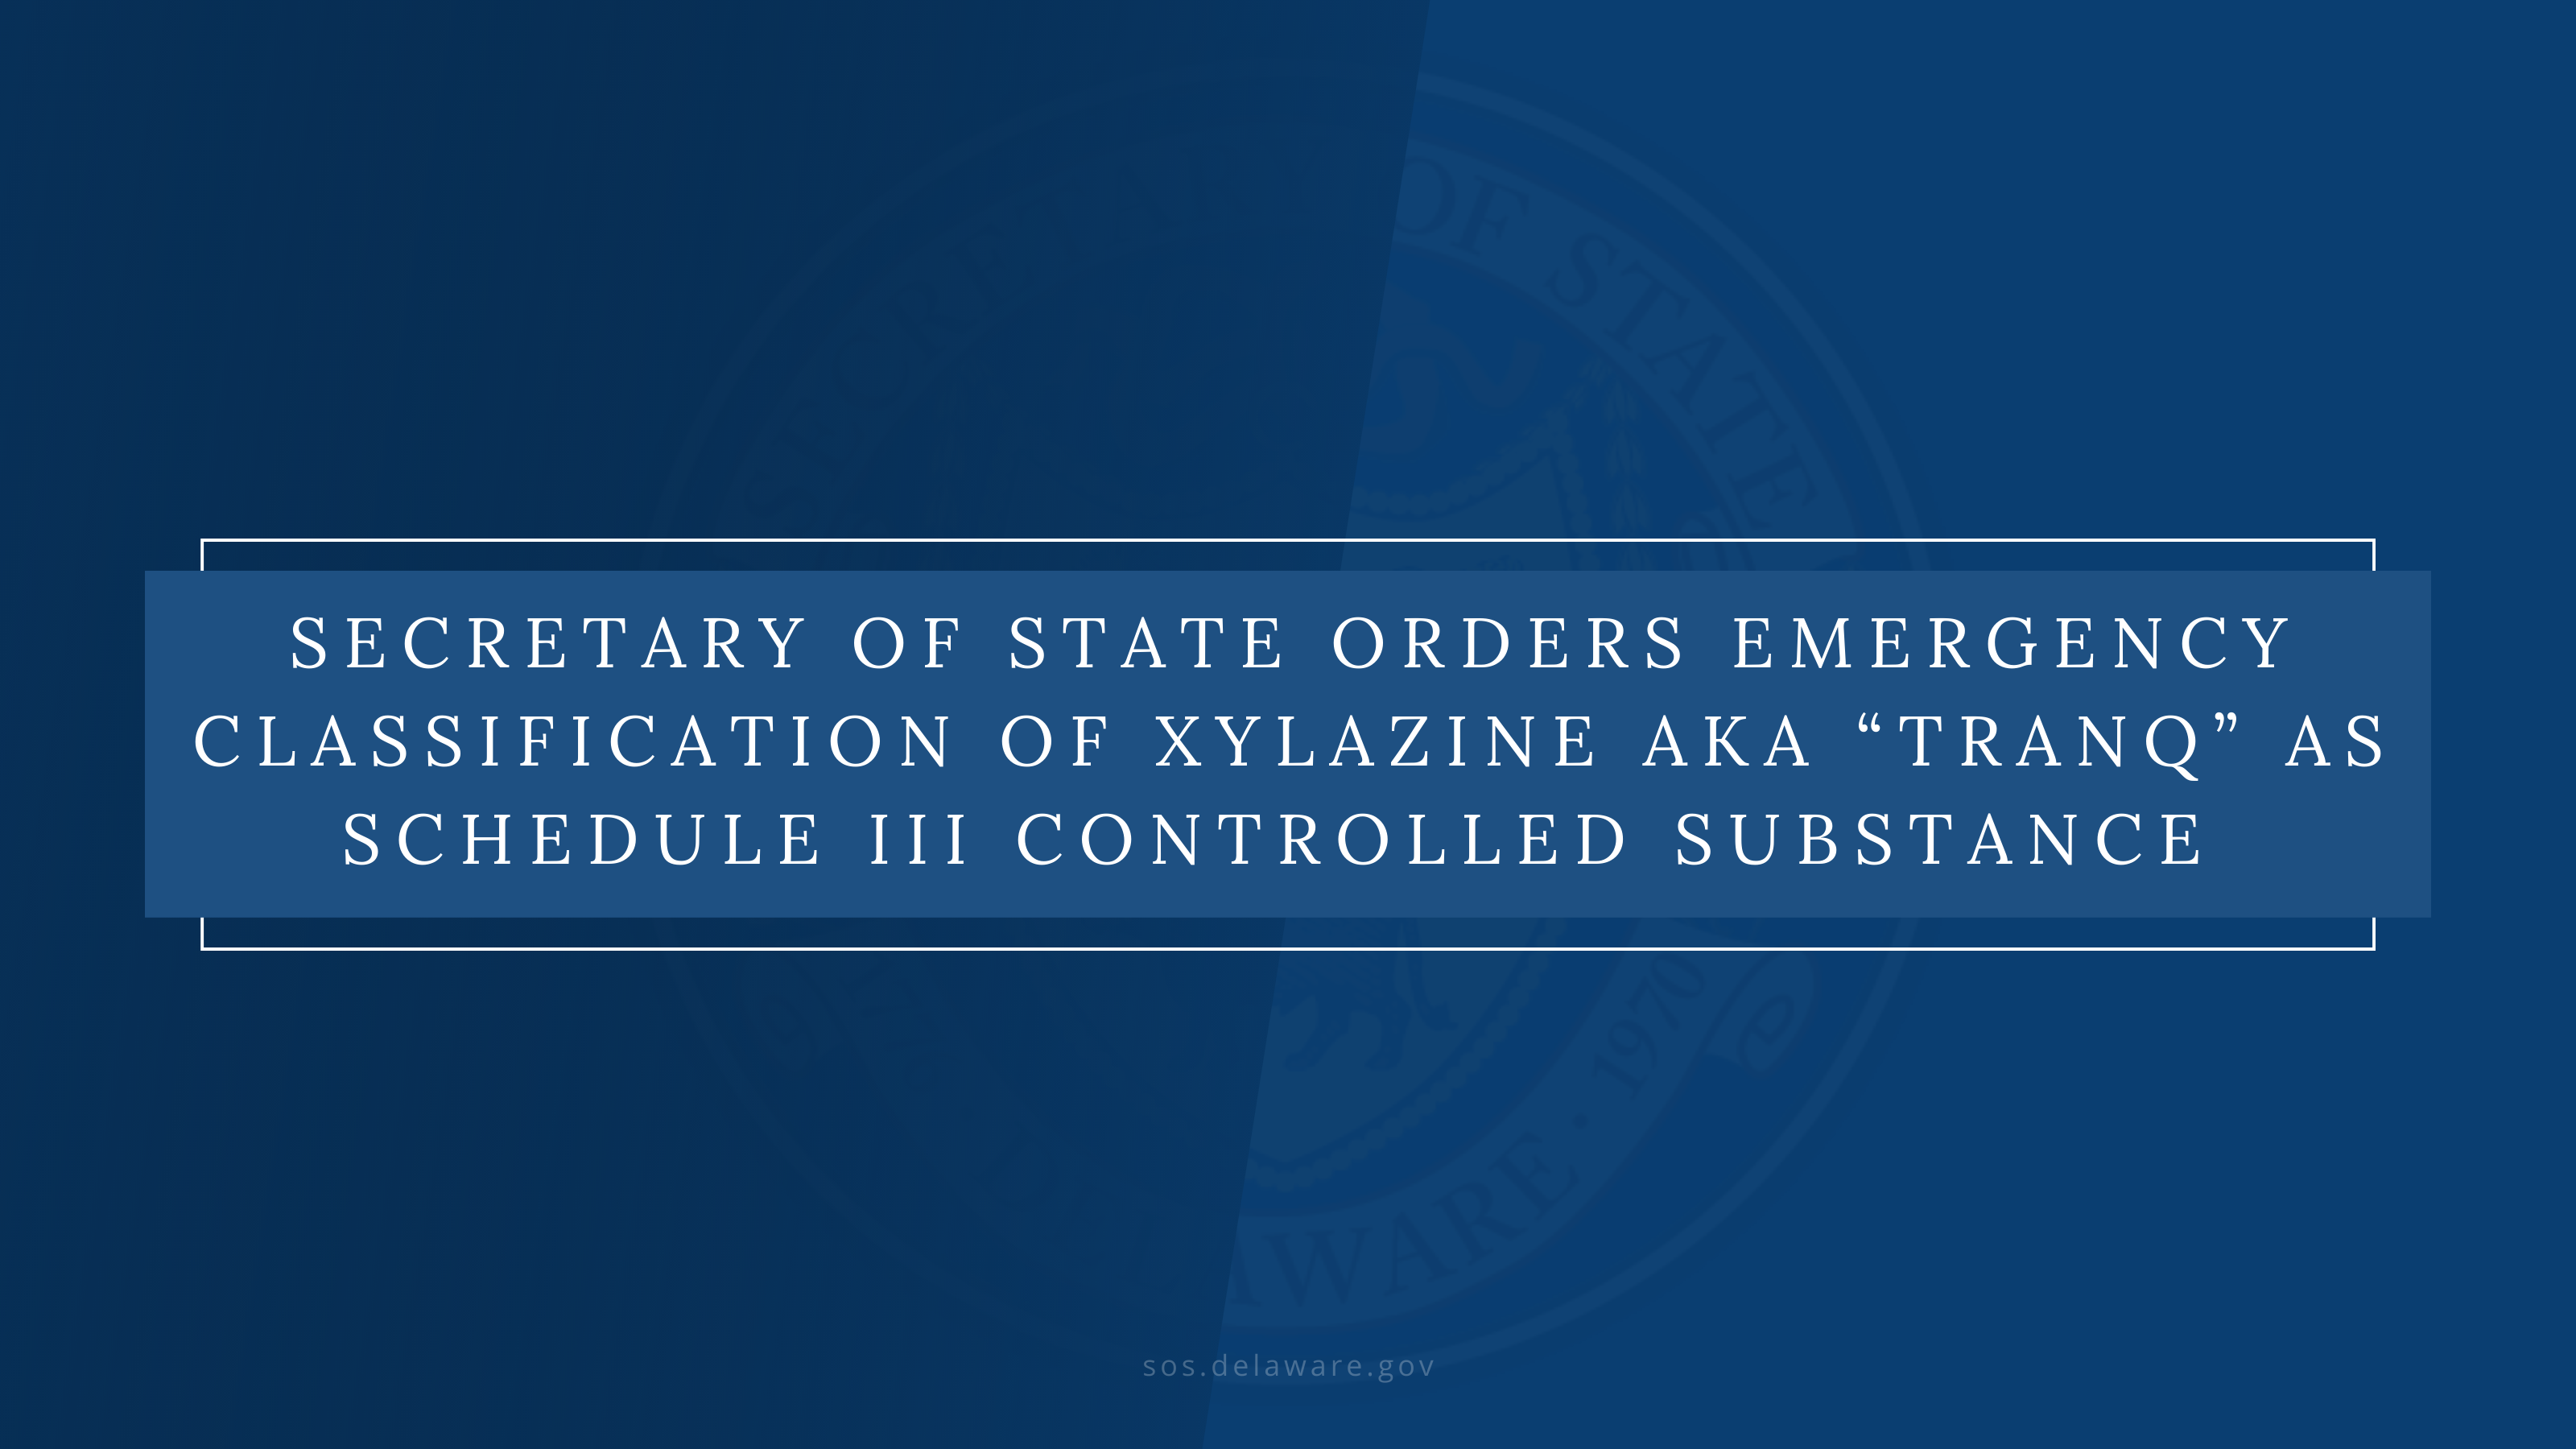 Graphic with the text "Secretary of State Orders Emergency Classification of Xylazine AKA "TRANQ" as Schedule III Controlled Substance.